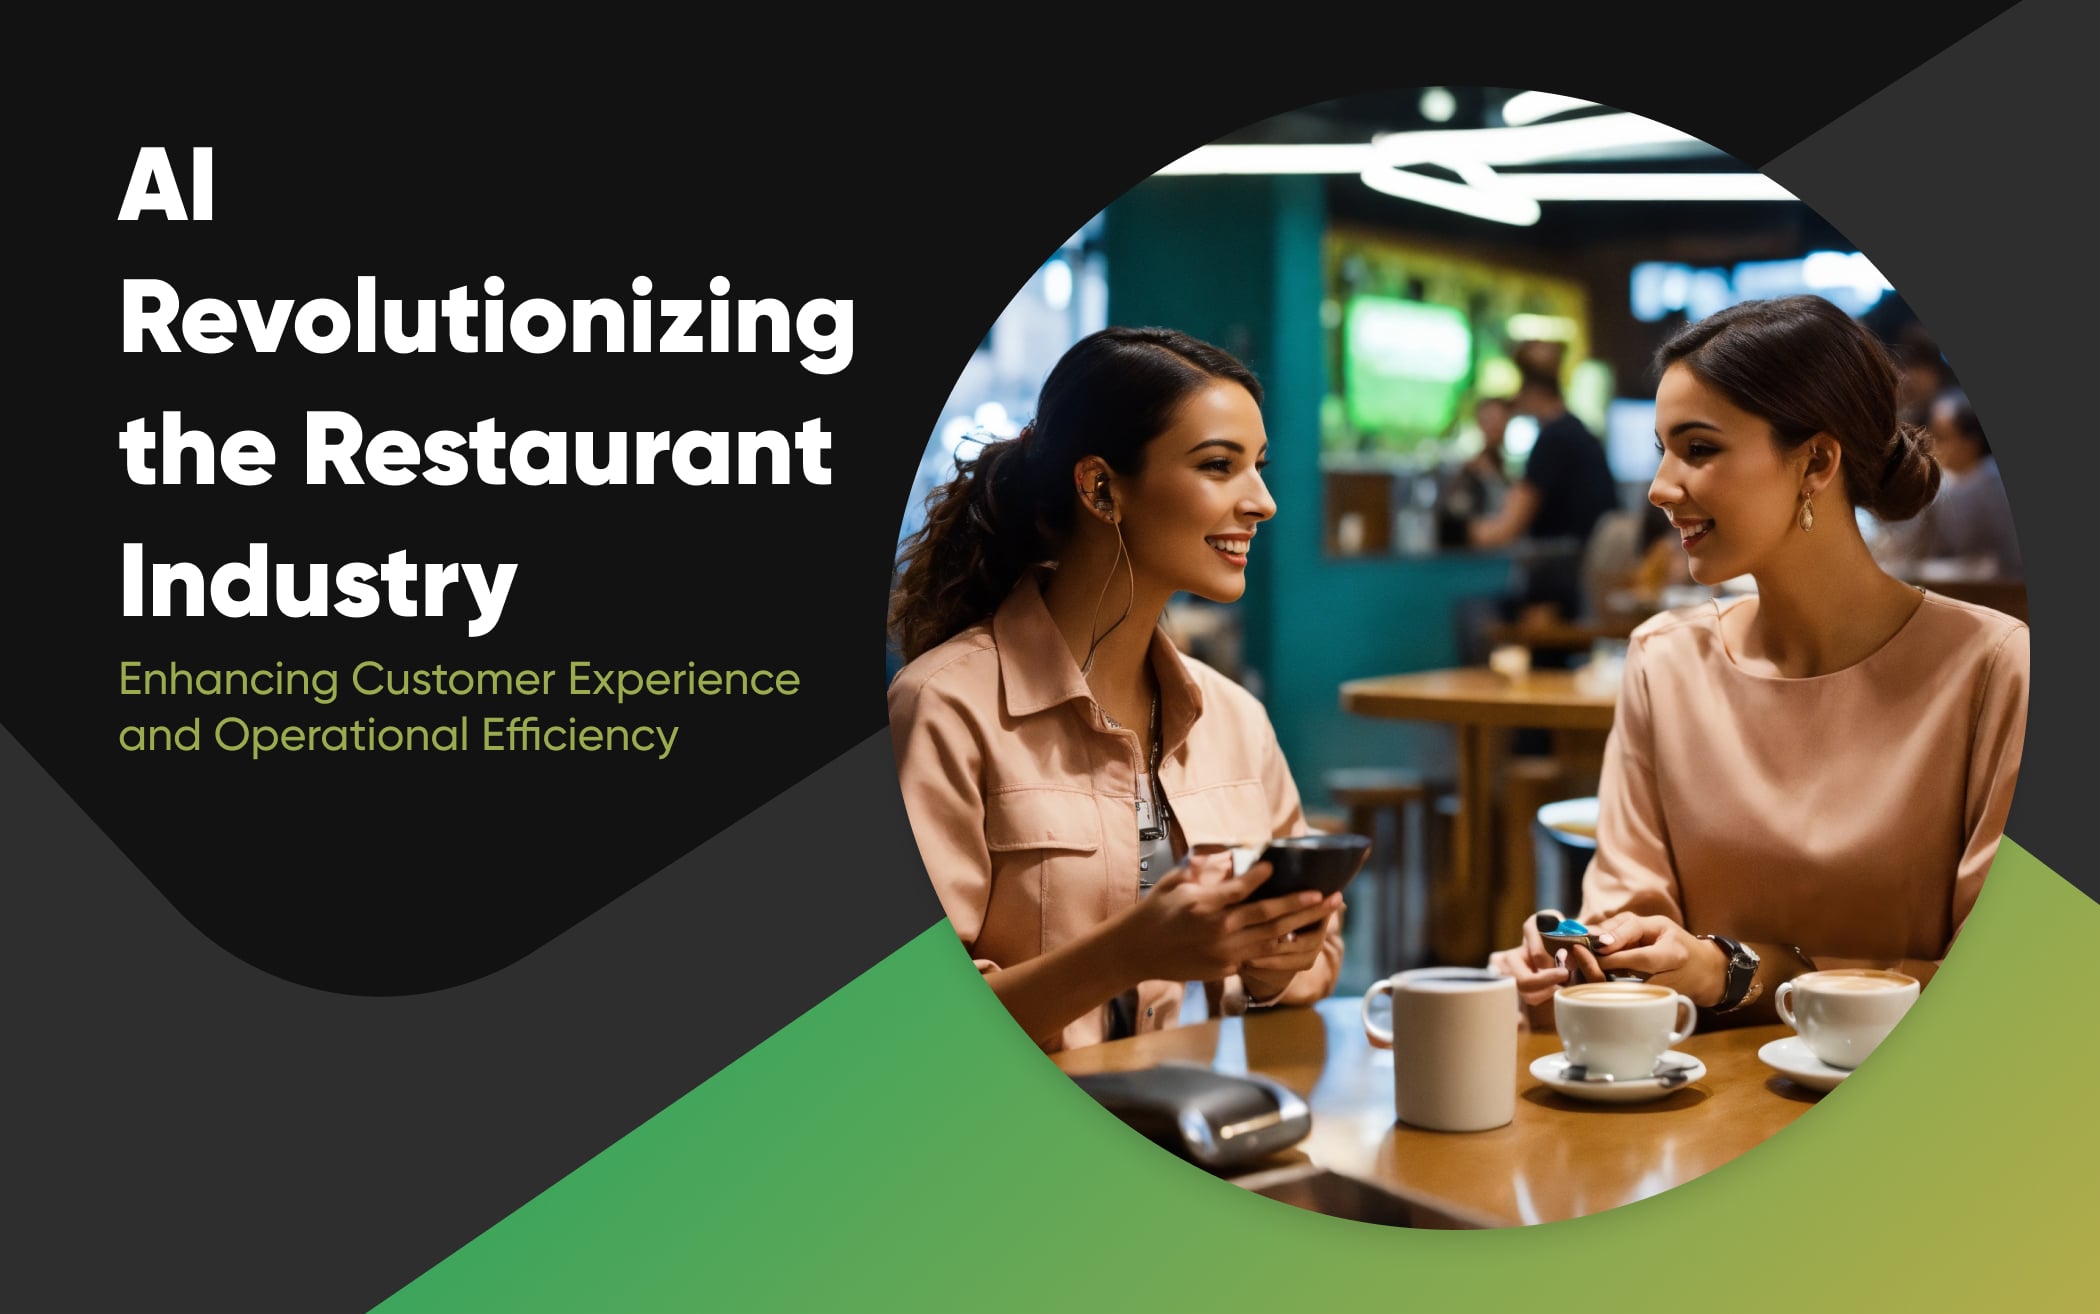 AI in the Restaurant Industry: Enhancing Customer Experience and Operational Efficiency